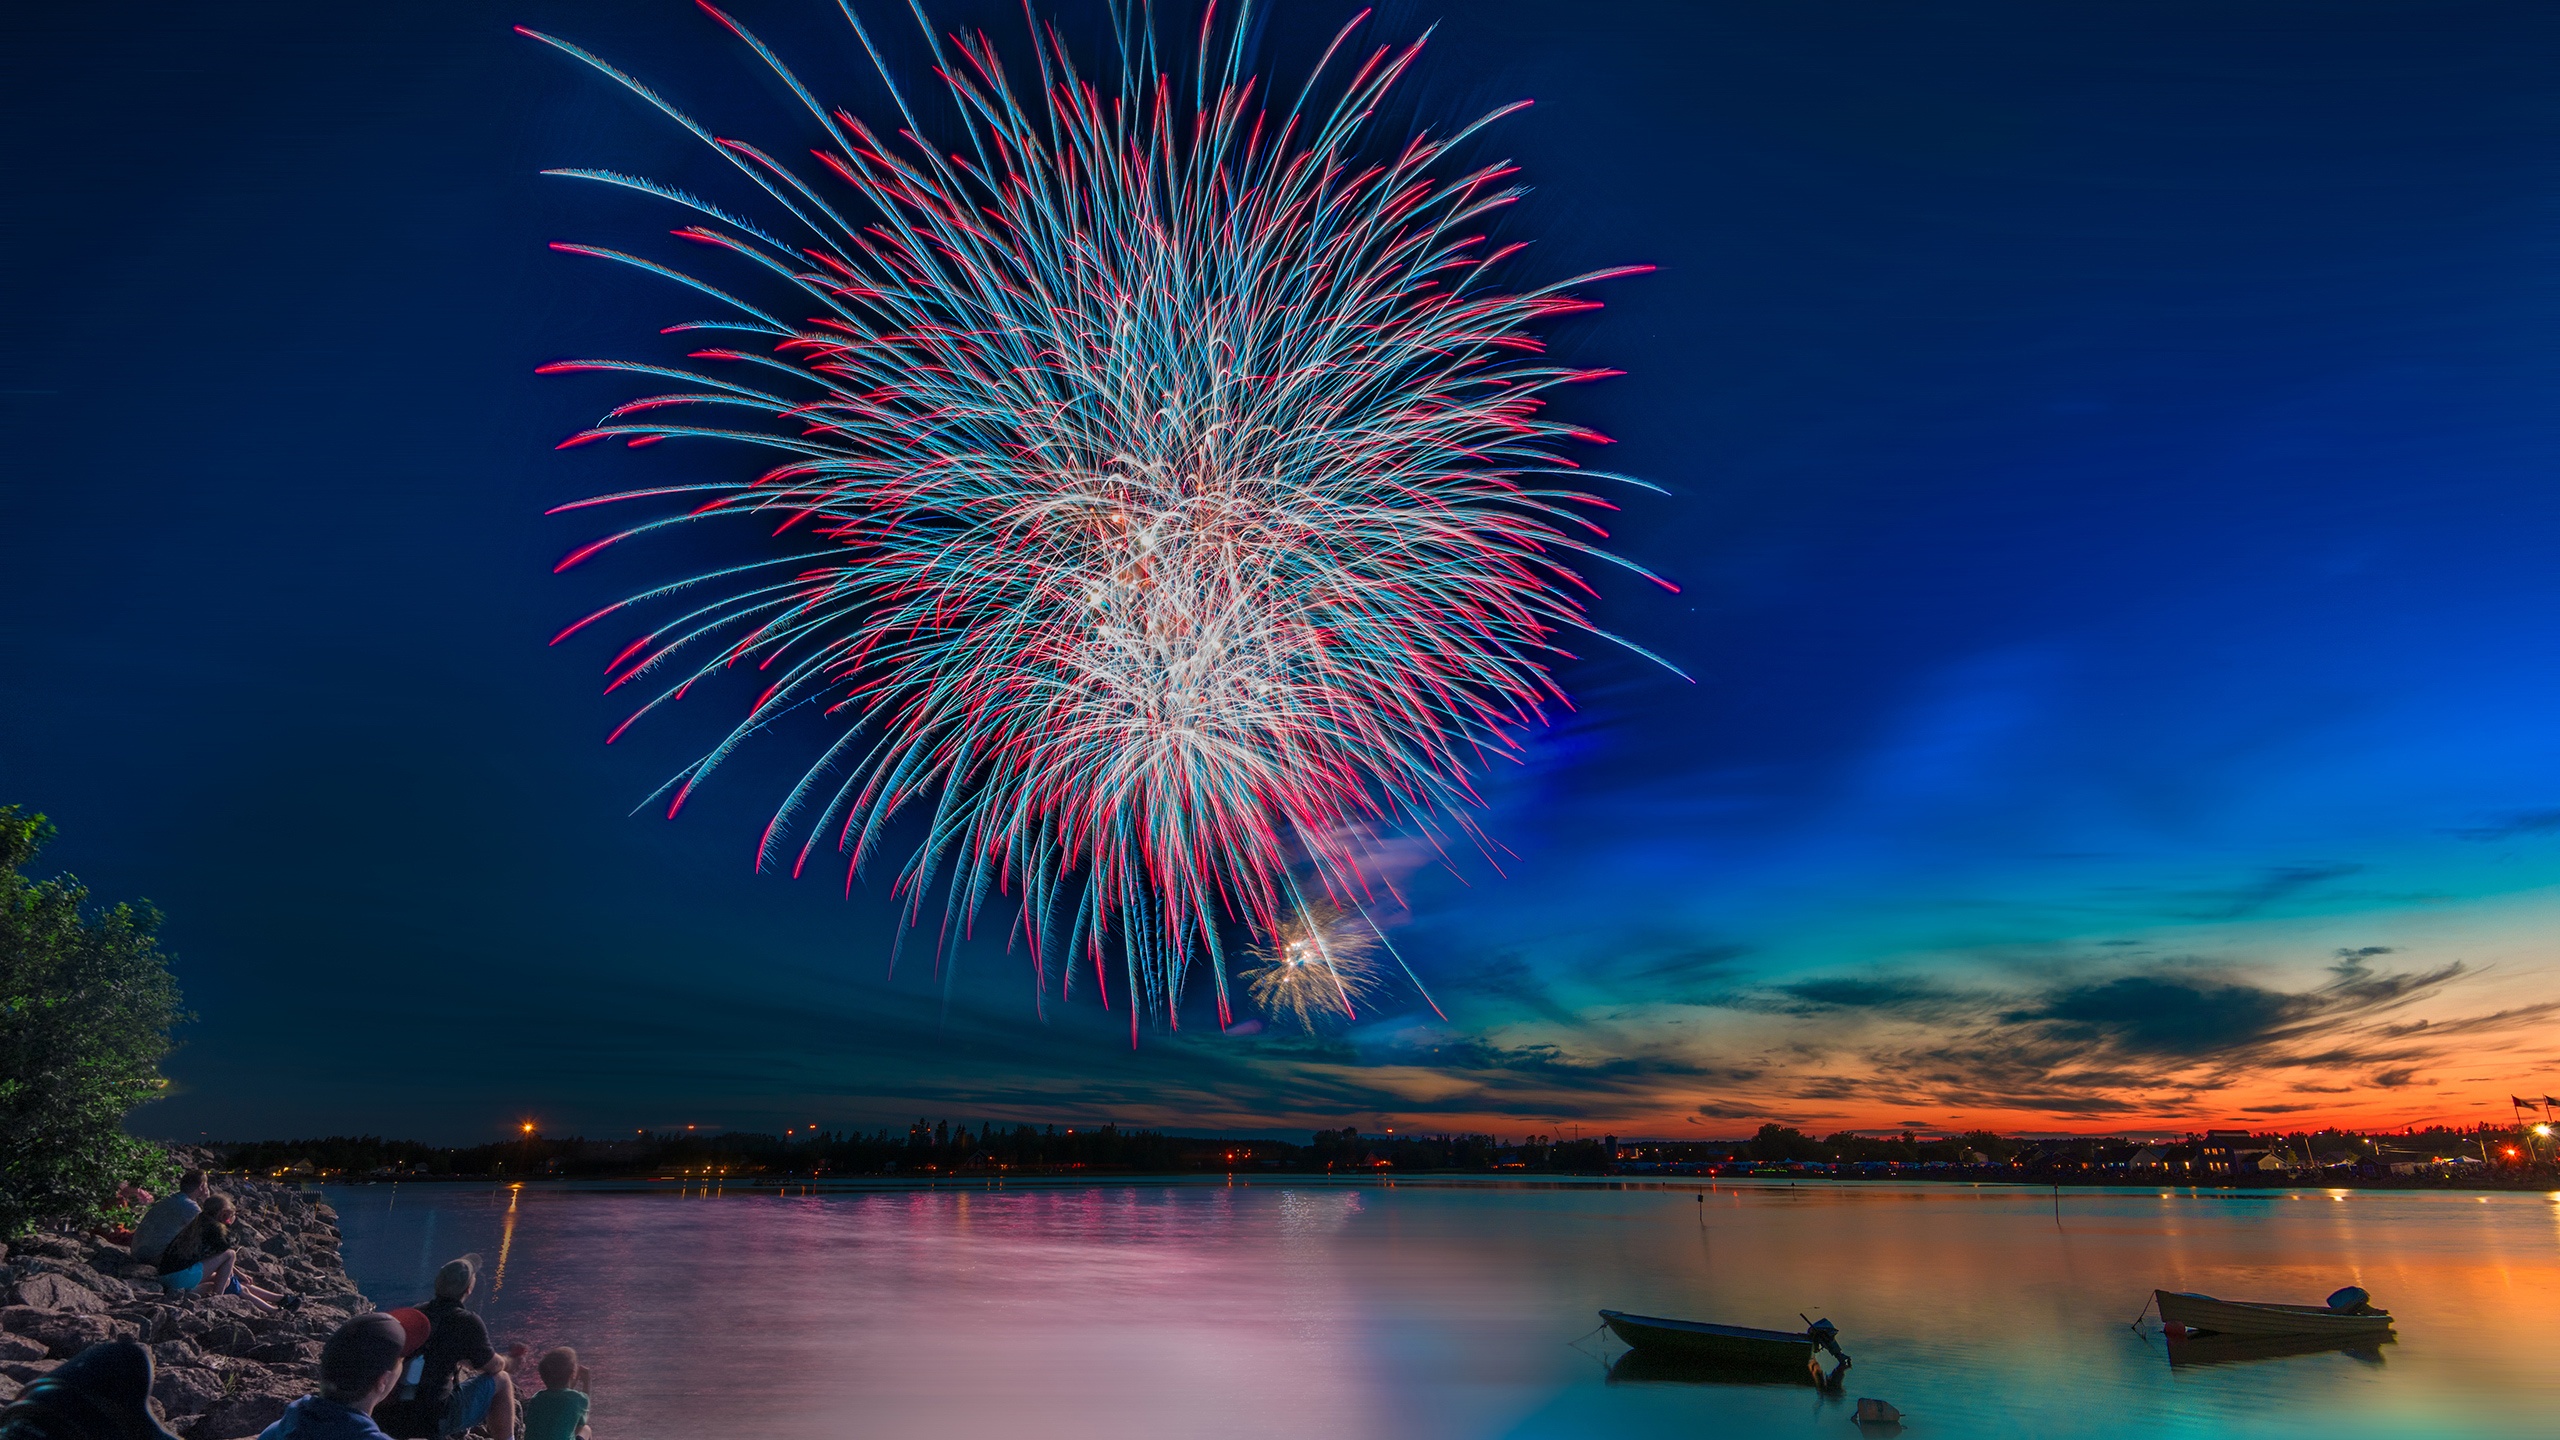 Fireworks hd picture simplyladeg